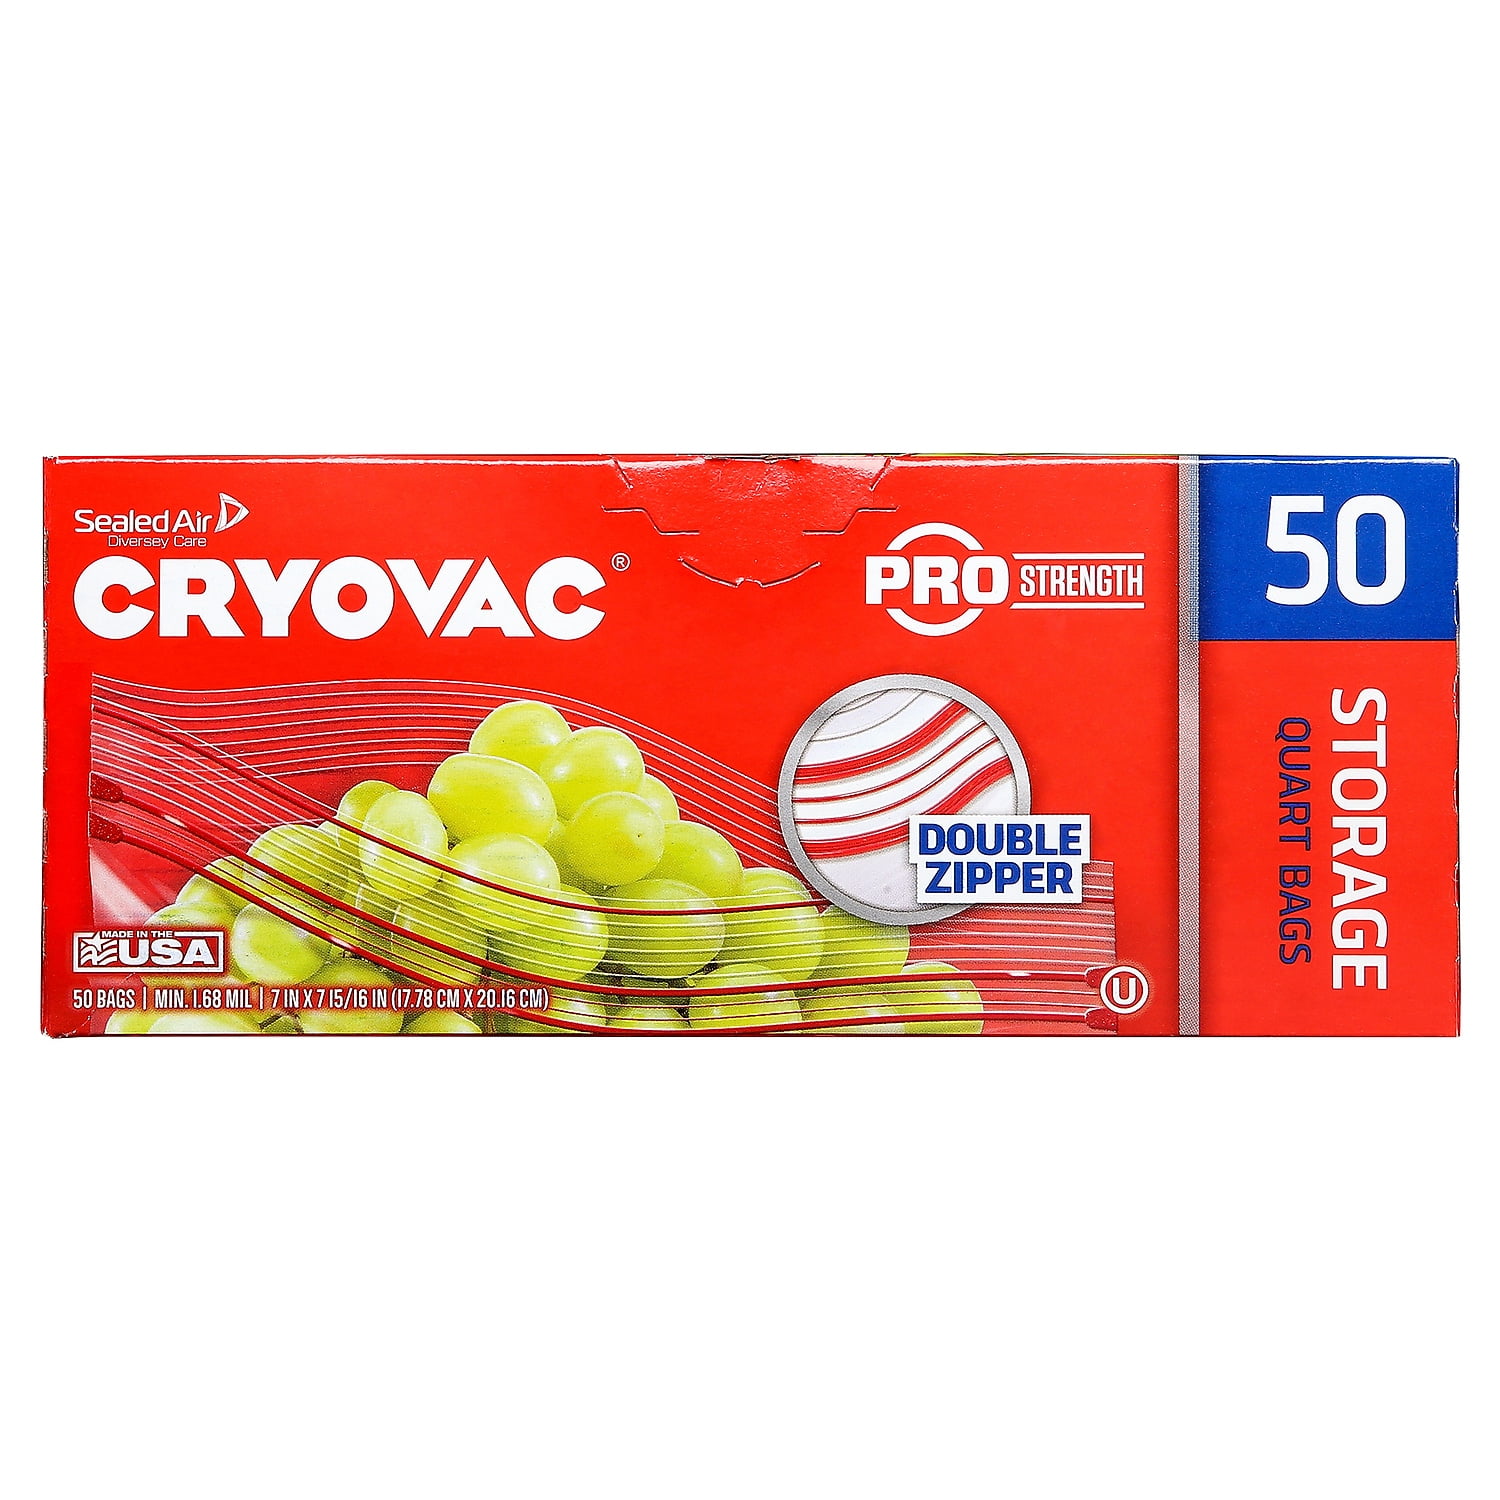 BAG CRYOVAC 400x300 (16x12) PK100 CTN1000 - 21593 - PACKAGING, BAGS, CRYOVAC-MICRO  - Product Detail - Northside Cleaning & Packaging Supplies